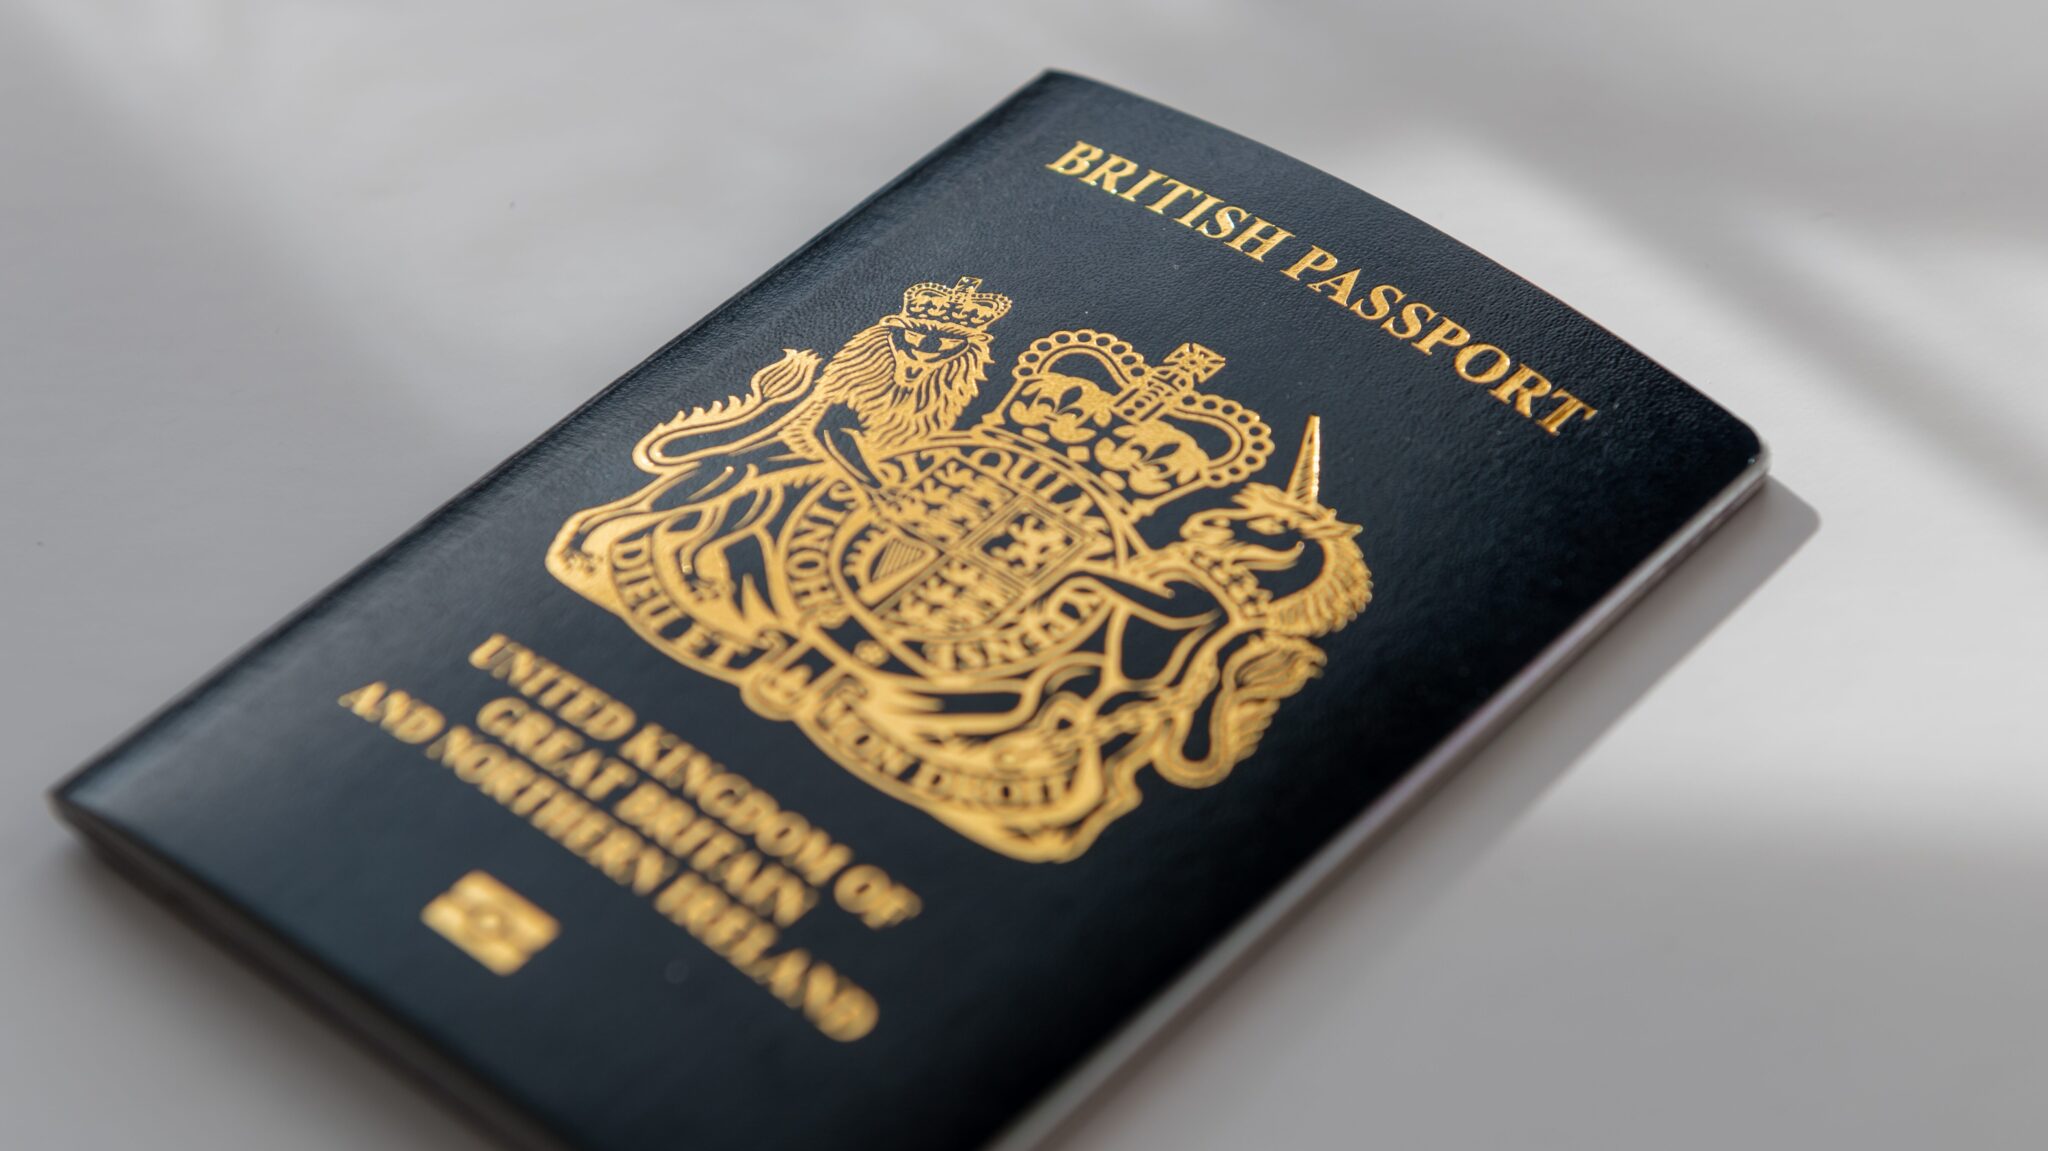 Update on automatic acquisition of British citizenship